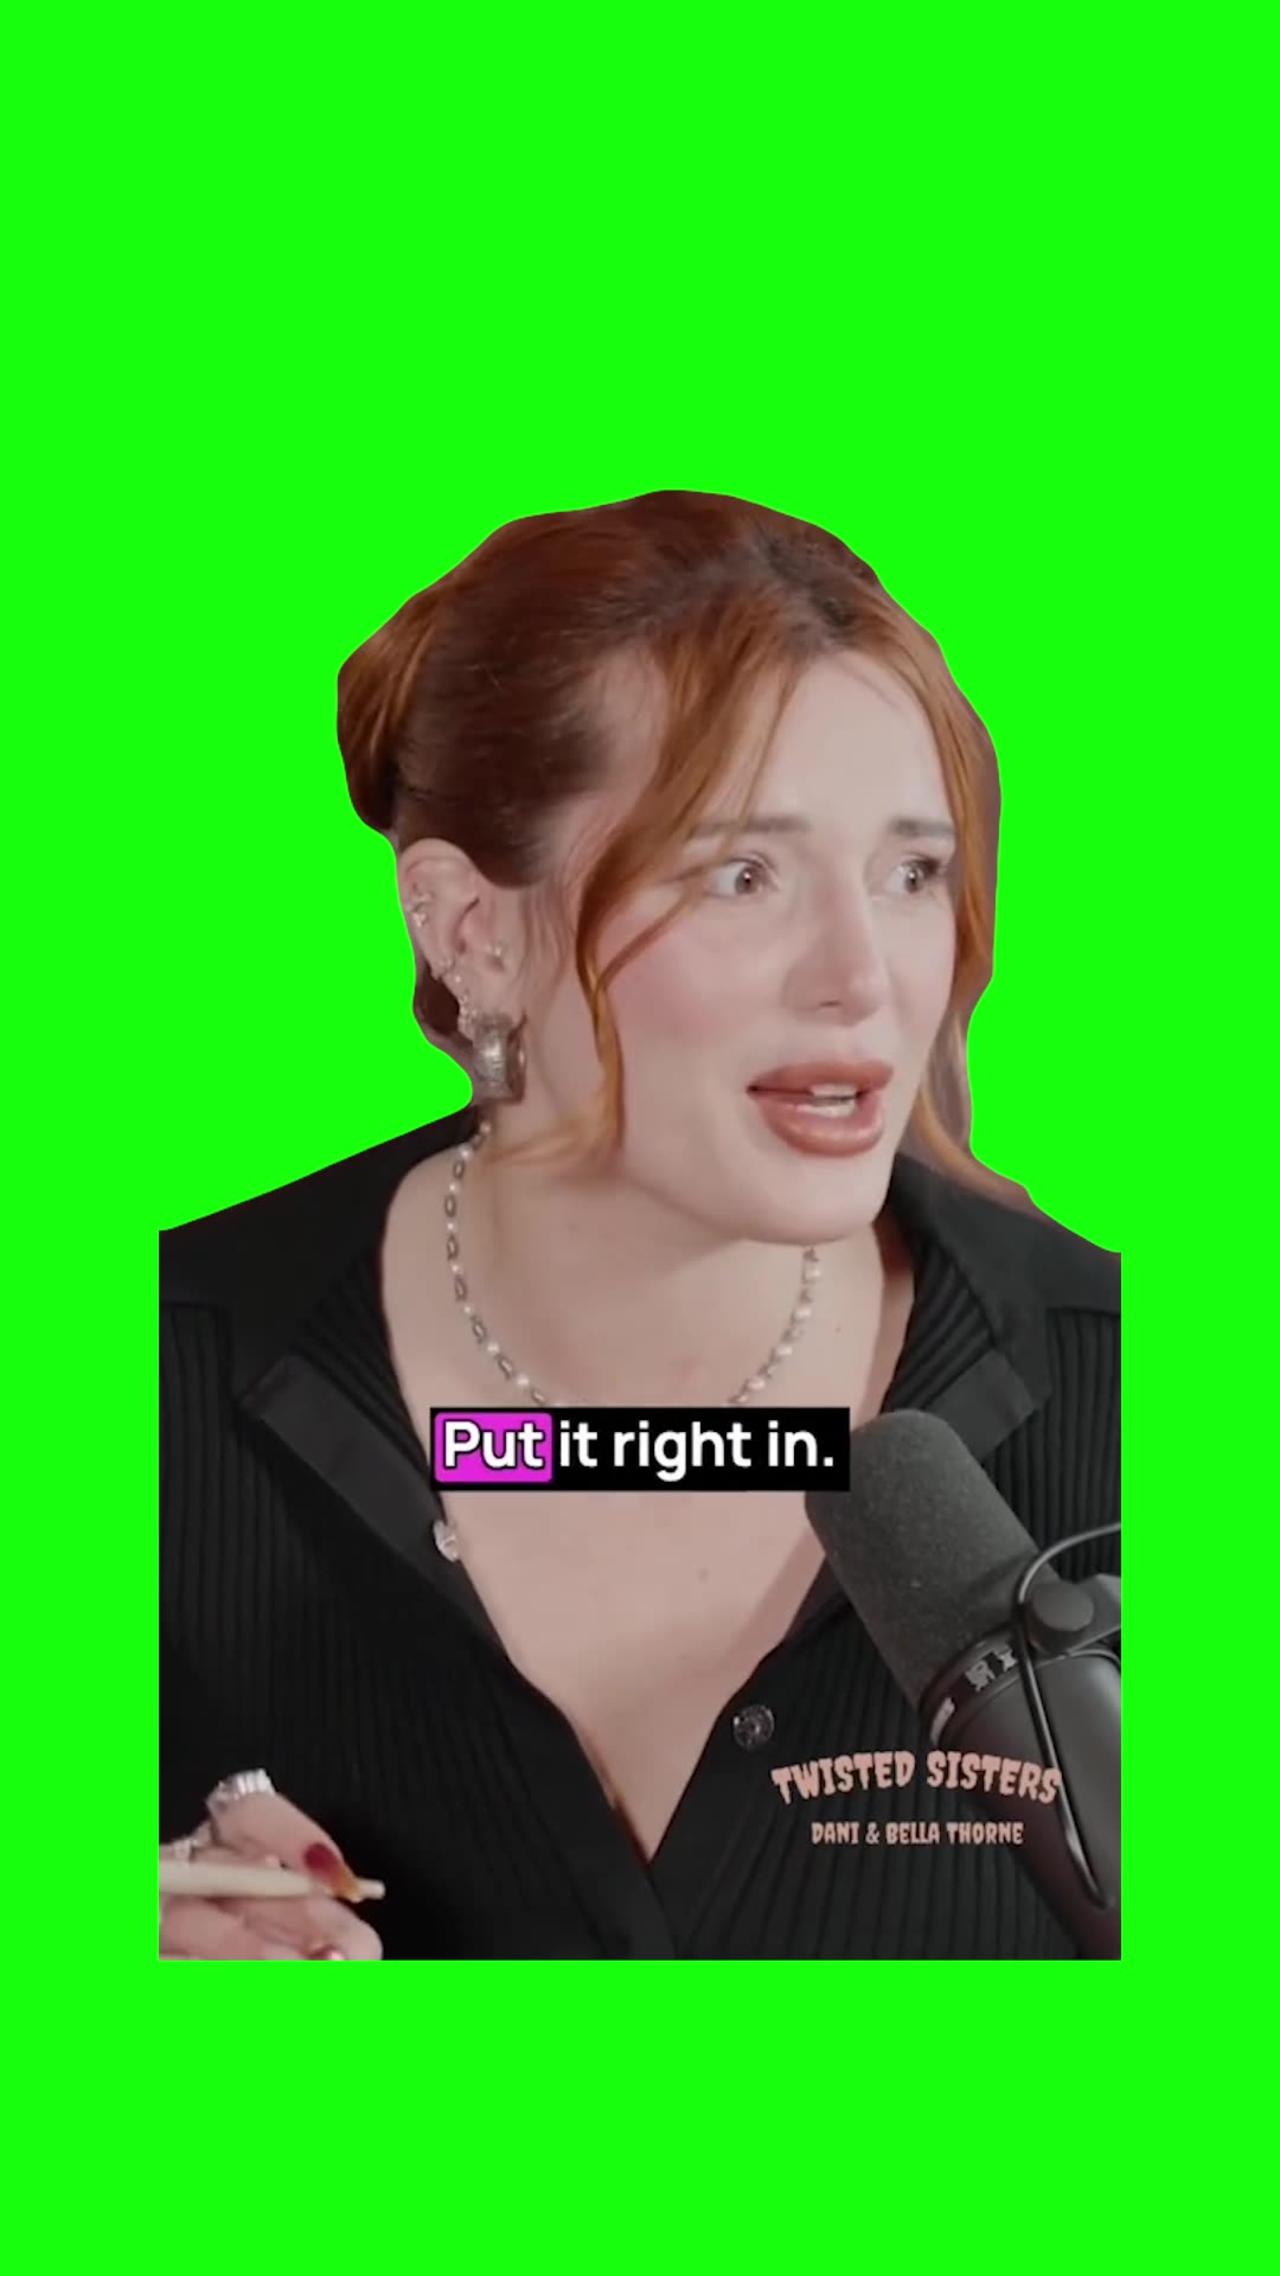 “Put It Right in Chanel” Bella Thorne | Green Screen